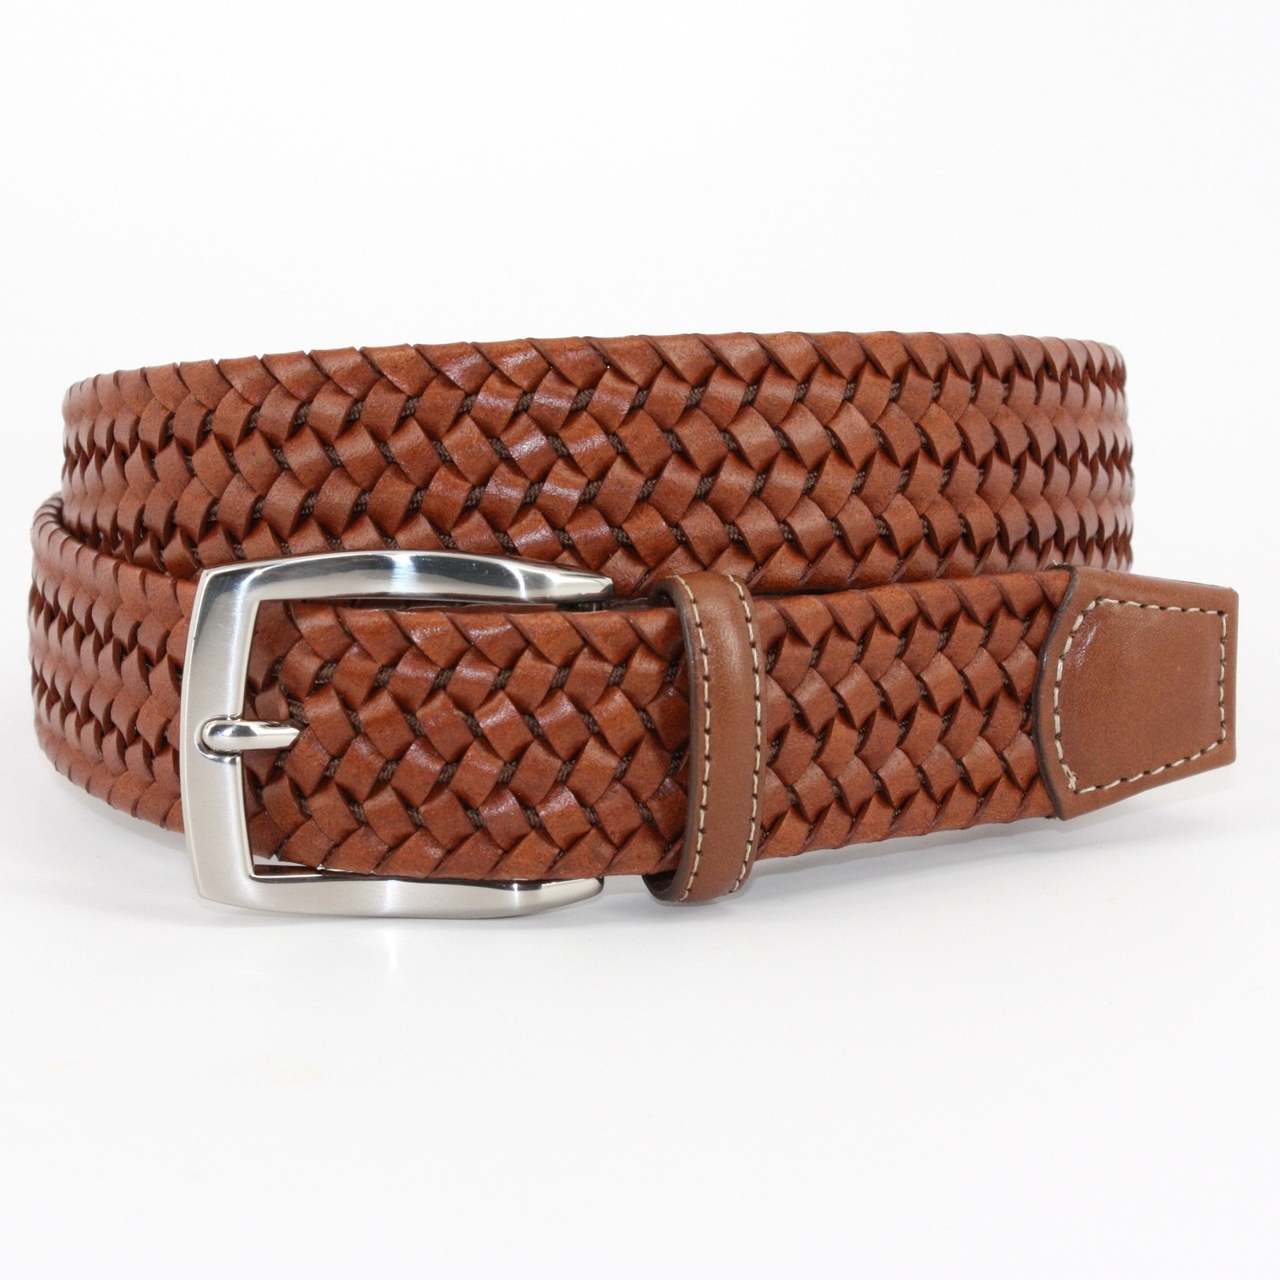 Italian Woven Stretch Leather Belt in Cognac by Torino Leather Co. -  Hansen's Clothing